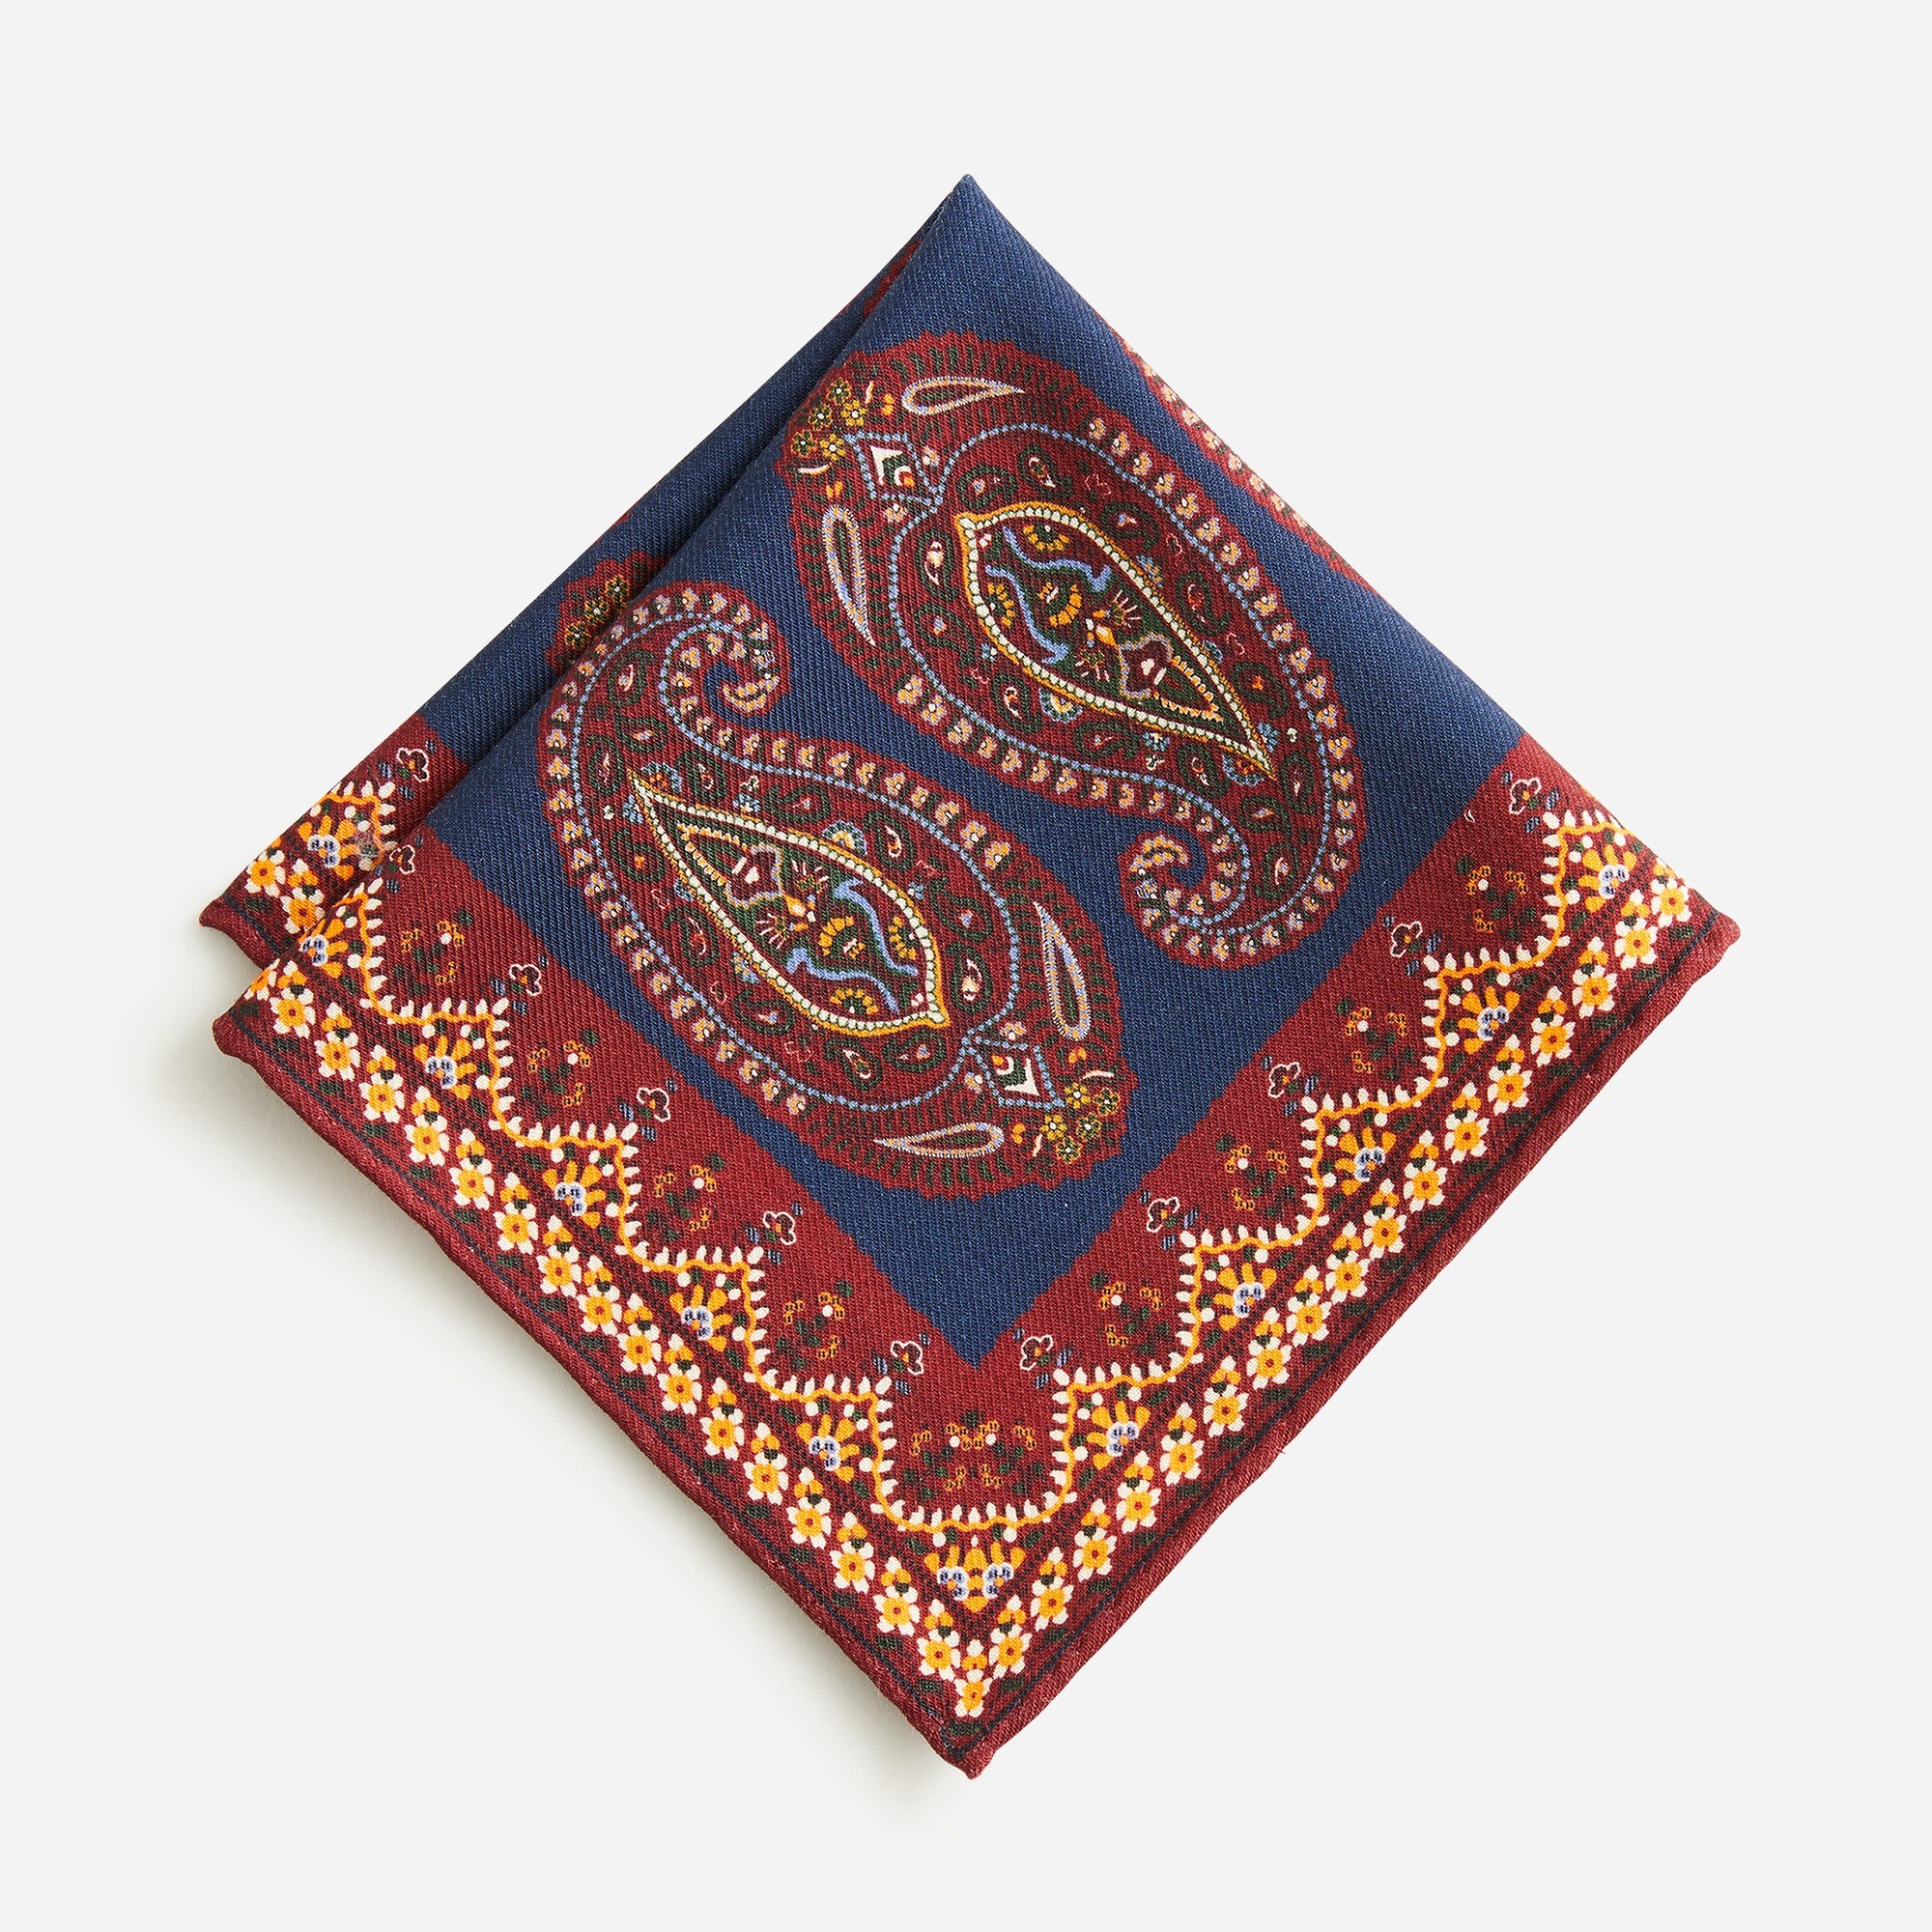  Wool challis pocket square in paisley